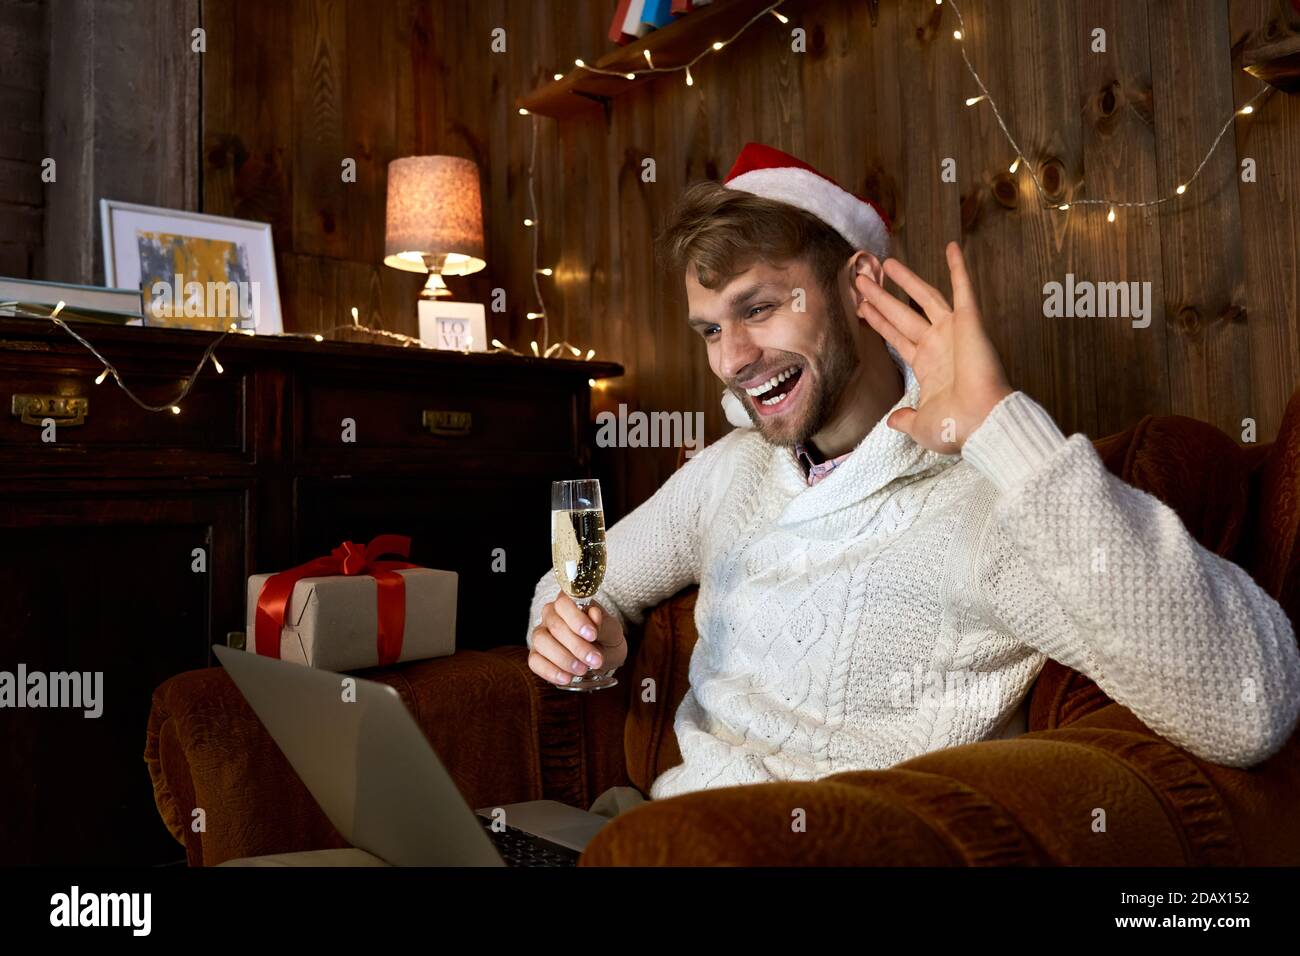 Happy young man waving hand celebrating virtual New Year party using laptop. Stock Photo